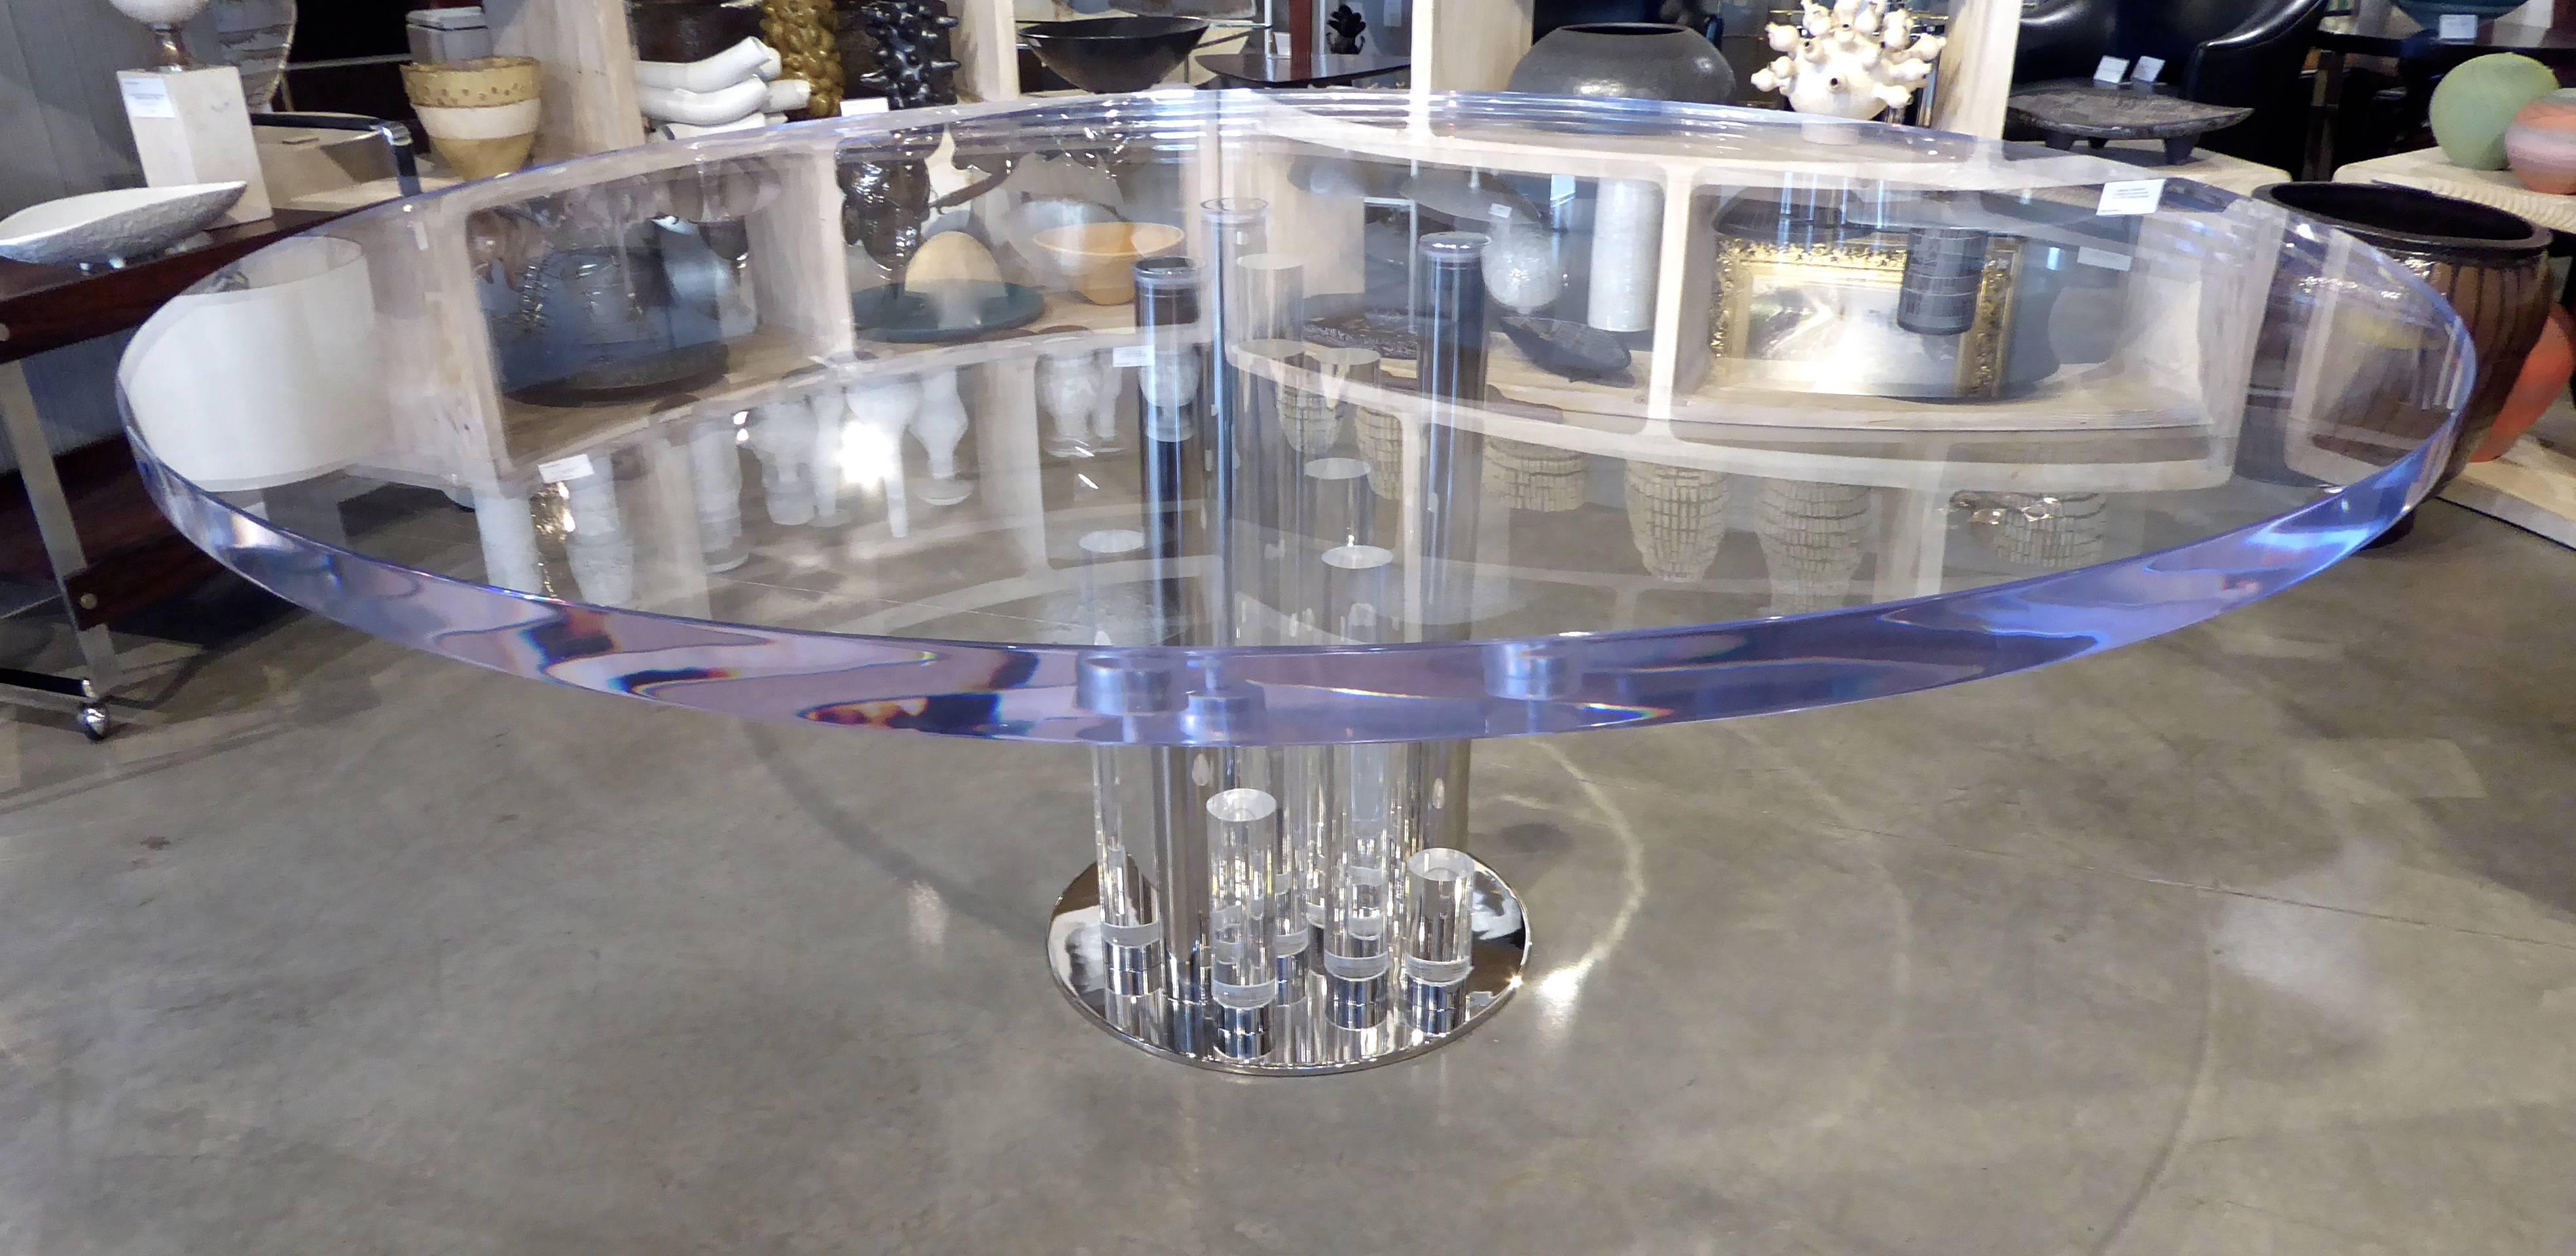 An amazing, large scale totally custom "Post Line" dining table by Charles Hollis Jones. The base of this table is composed of 16 stalagmite "posts" in acrylic and nickel. The three support columns are nickel plated steel. These